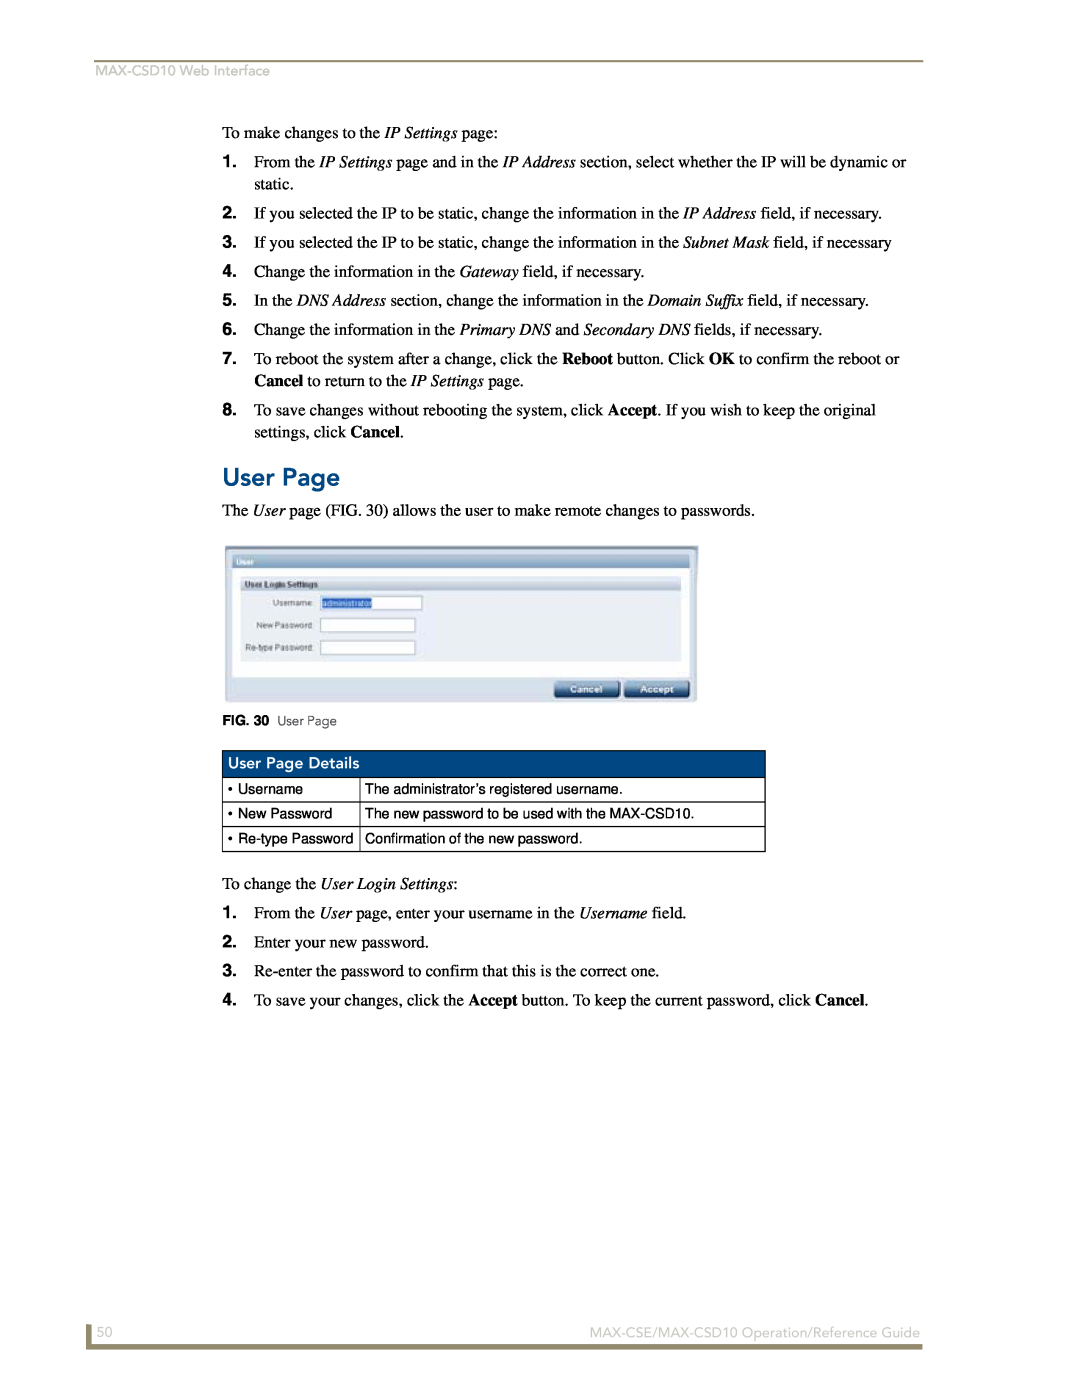 AMX MAX-CSE, MAX-CSD10 manual User Page, To make changes to the IP Settings page 